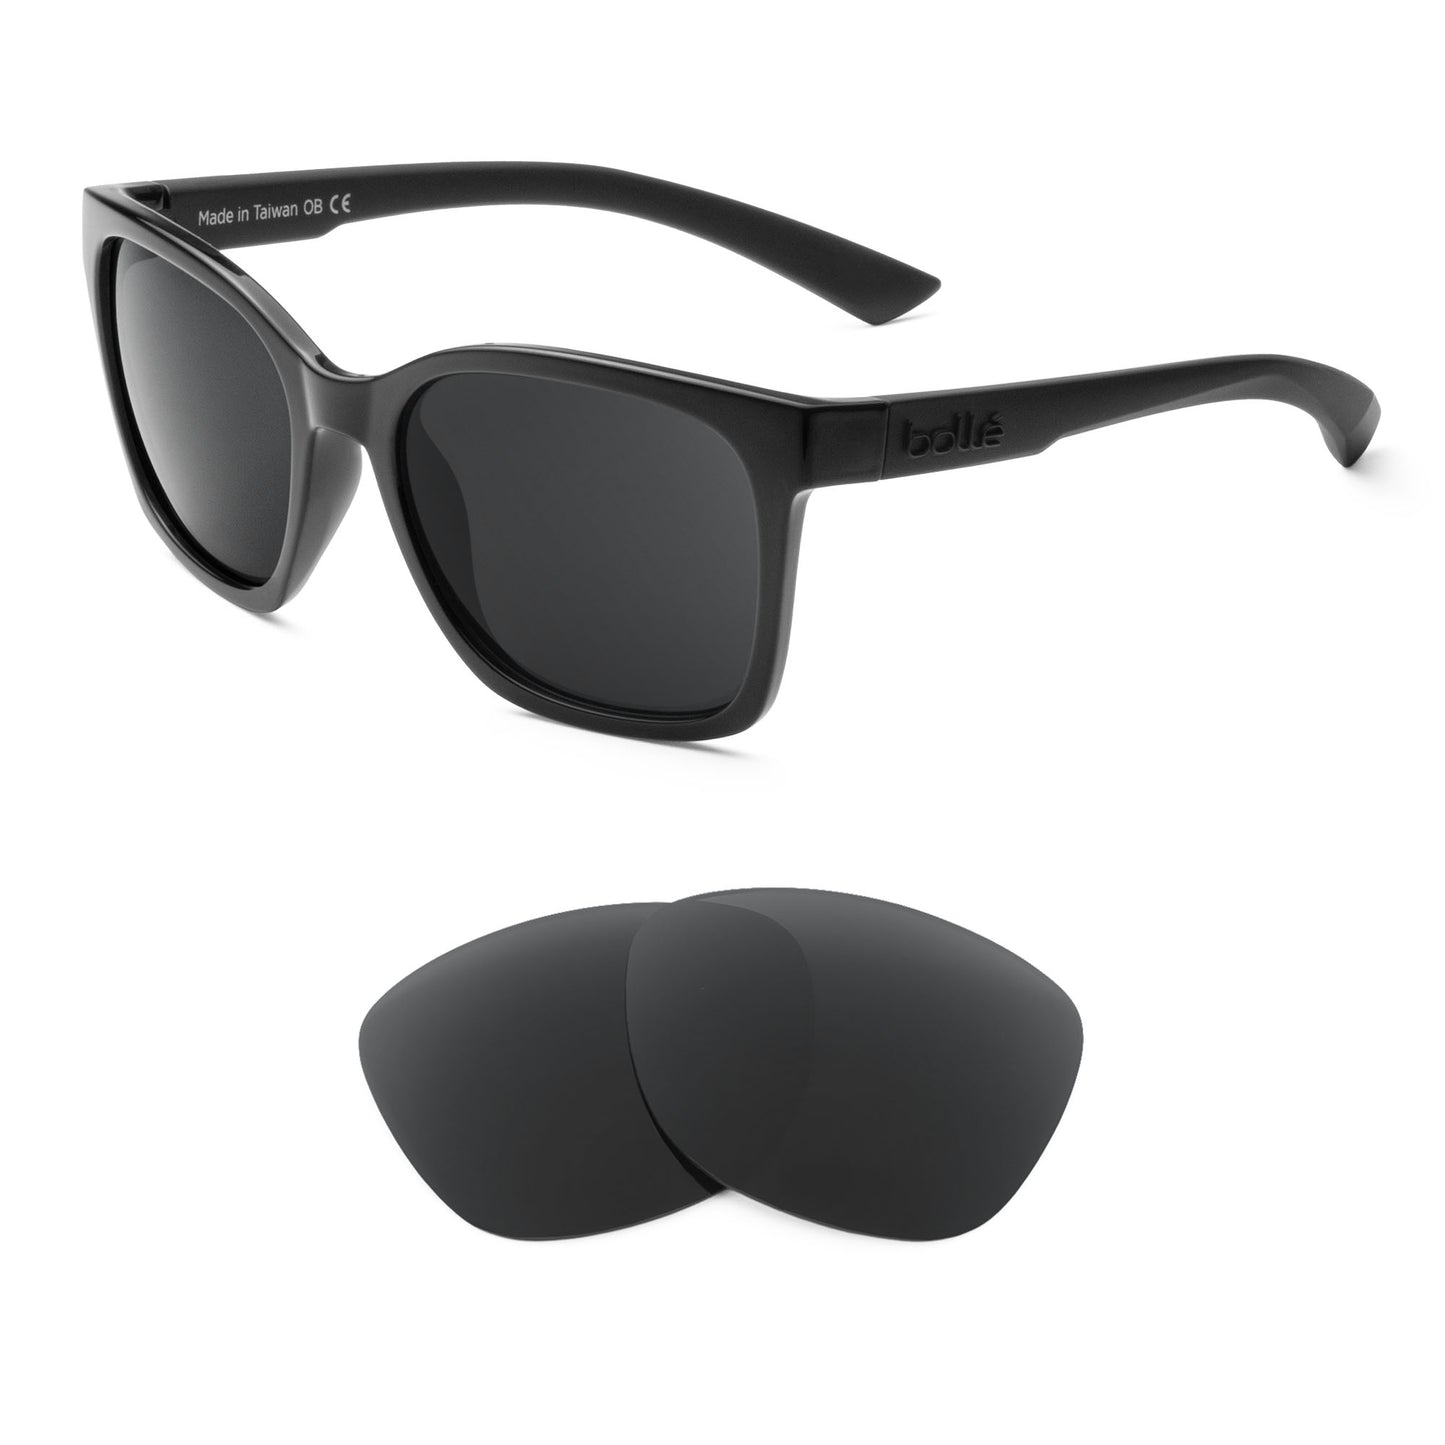 Bolle Ada sunglasses with replacement lenses